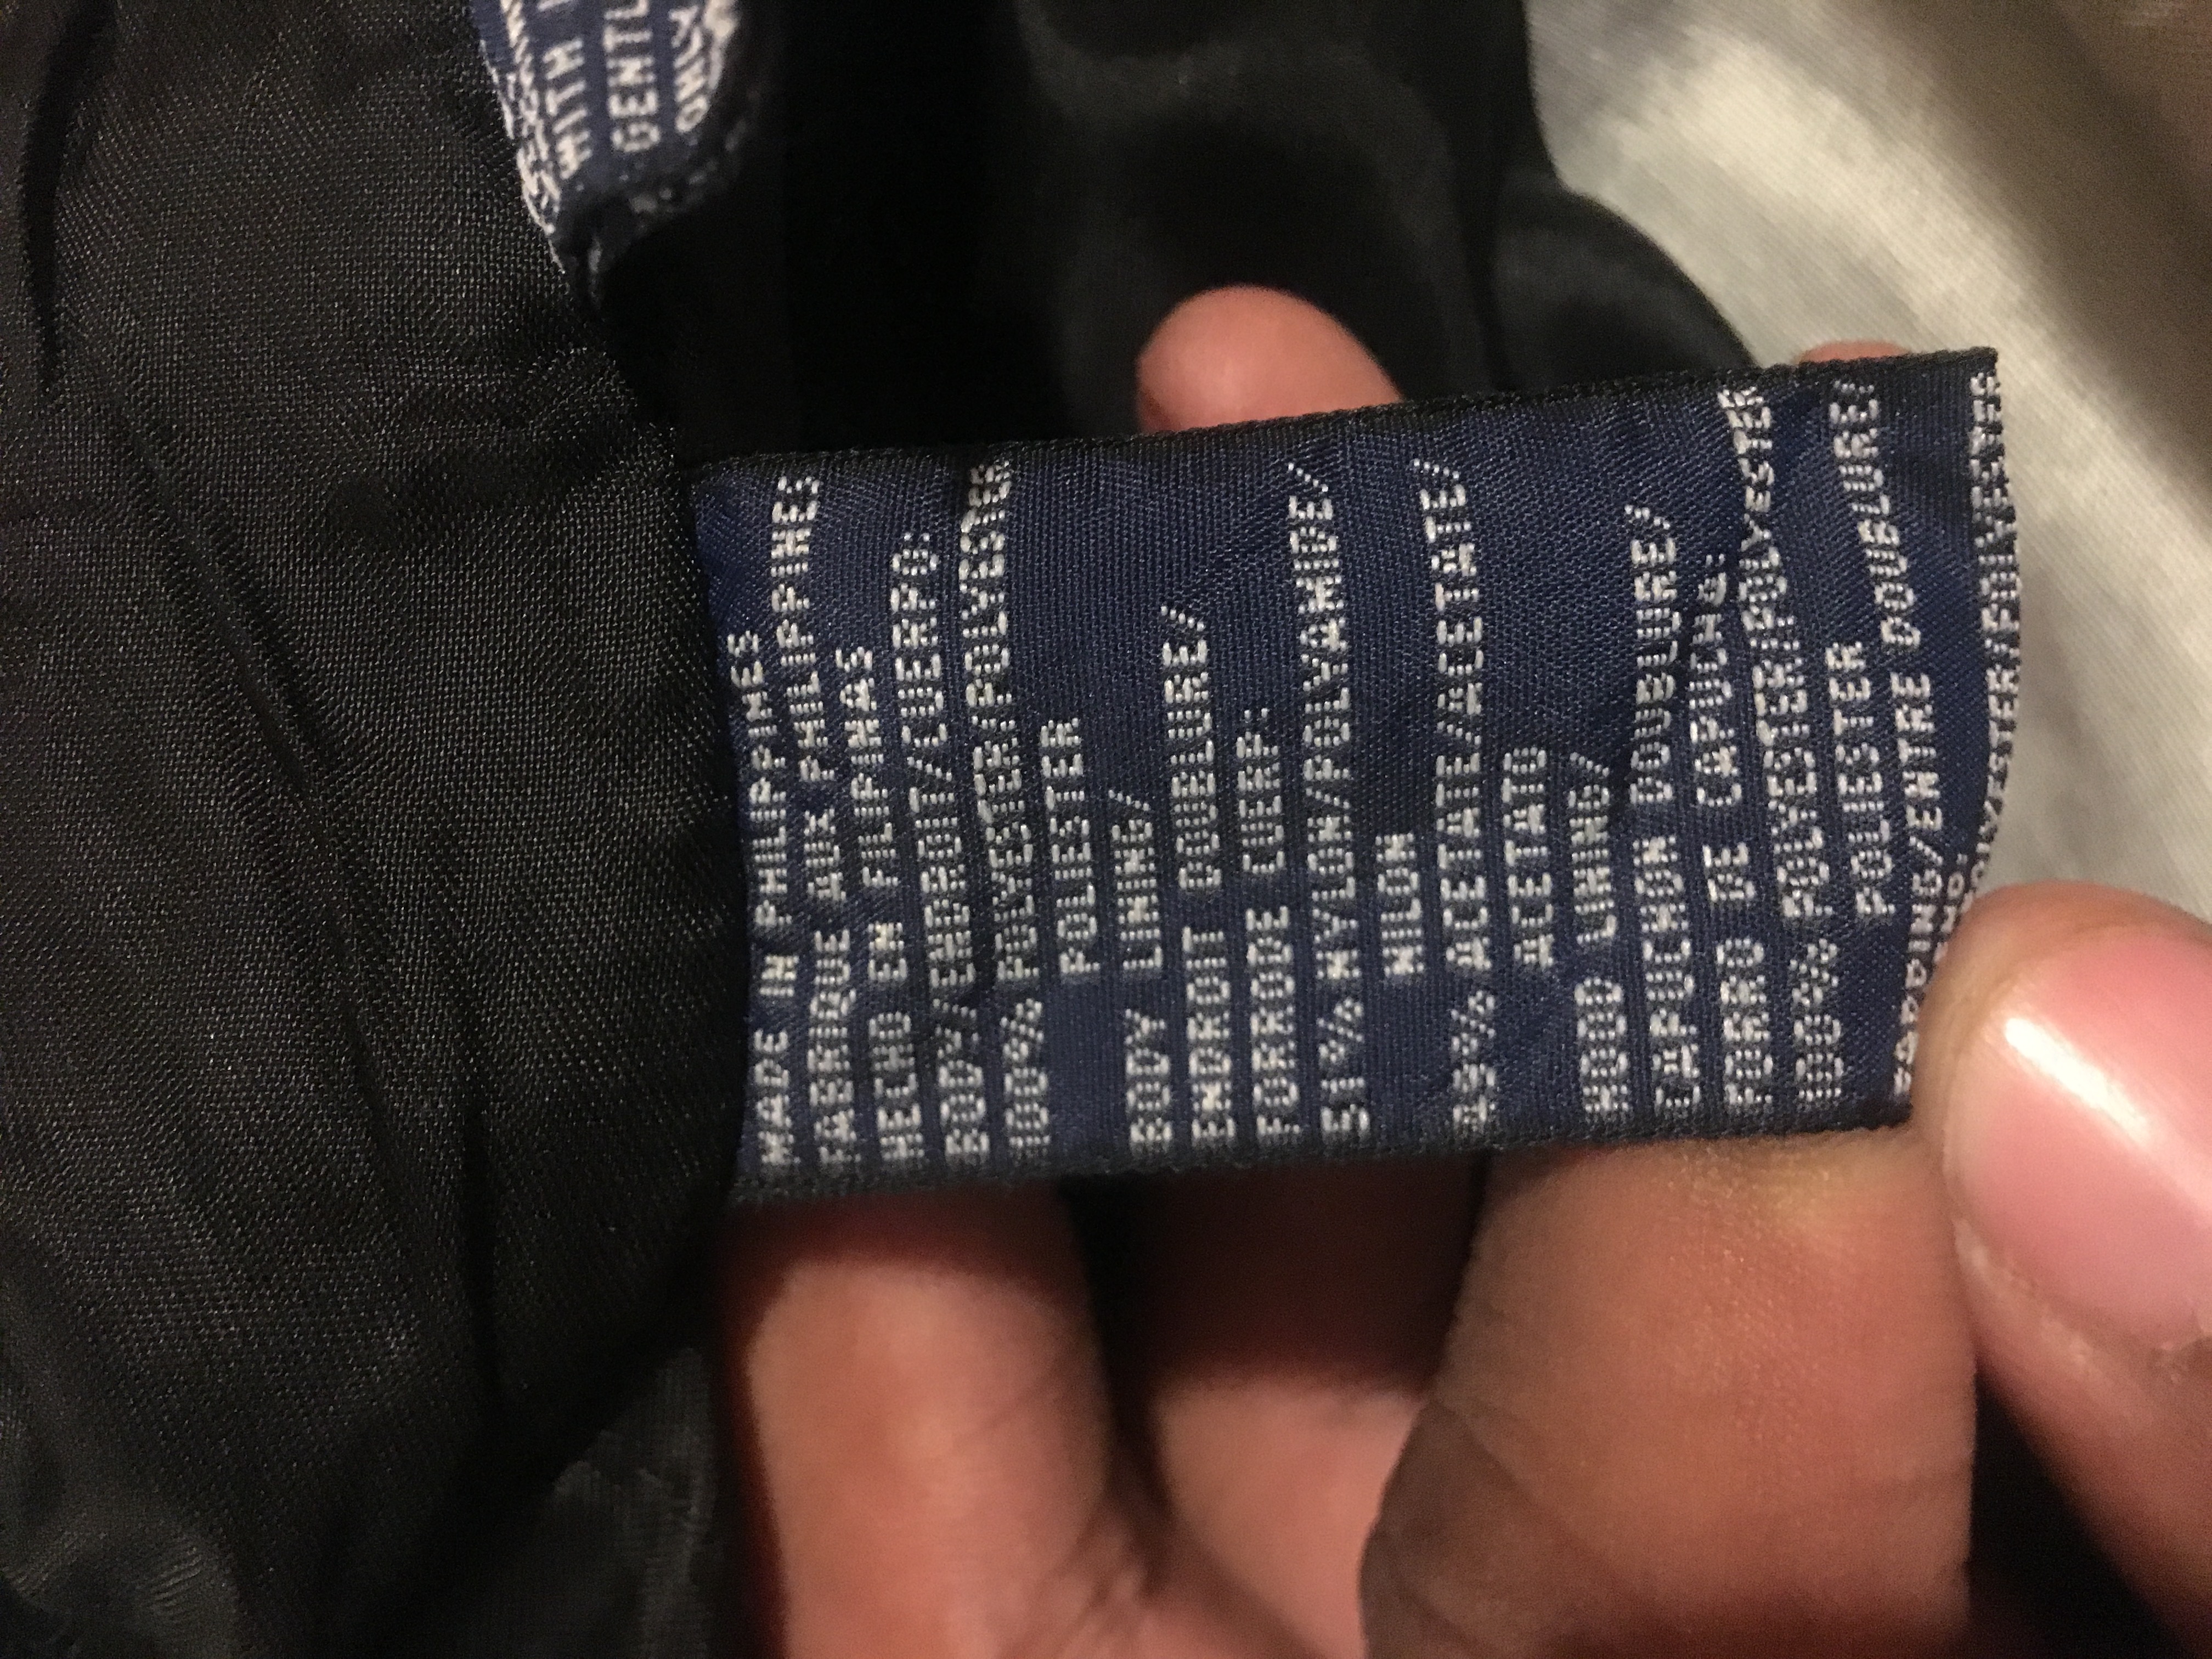 How to tell a fake or genuine Tommy Hilfiger sweater